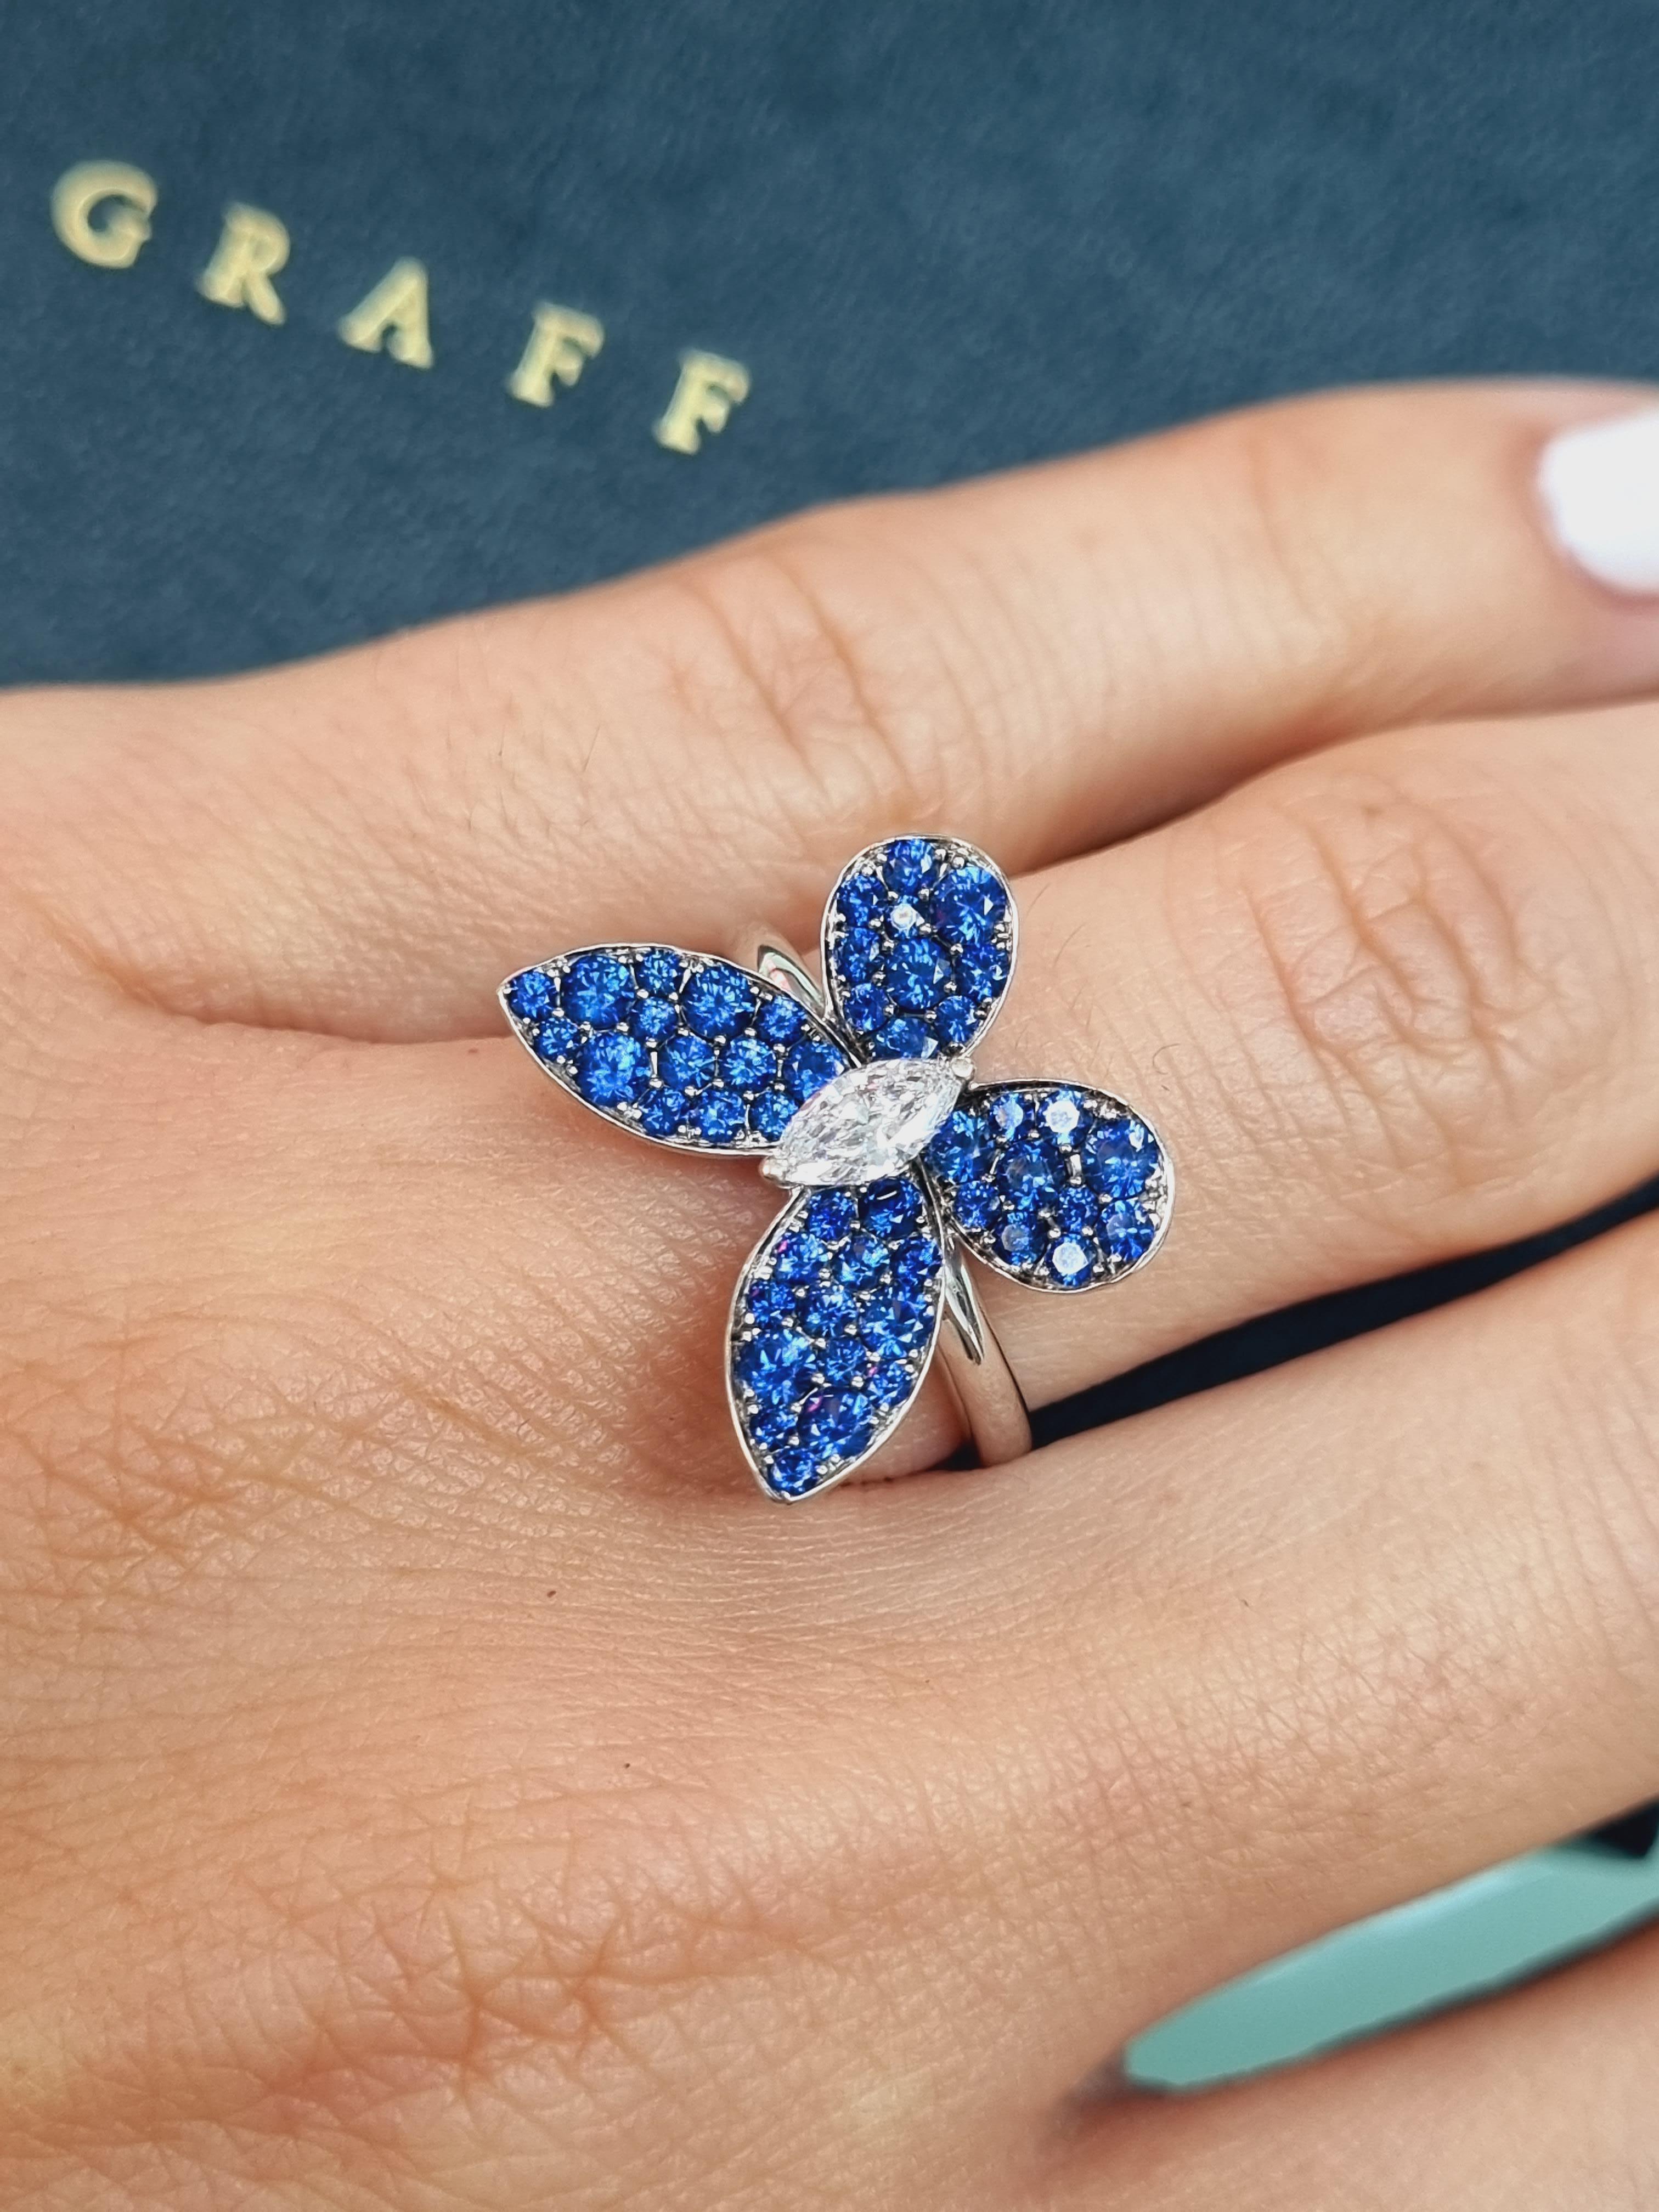 Introducing a stunning masterpiece from the renowned Graff, the Butterfly Ring crafted in exquisite 18k white gold. This ring boasts a delicate yet captivating design inspired by the elegance of butterflies. At its heart, a marquise cut diamond